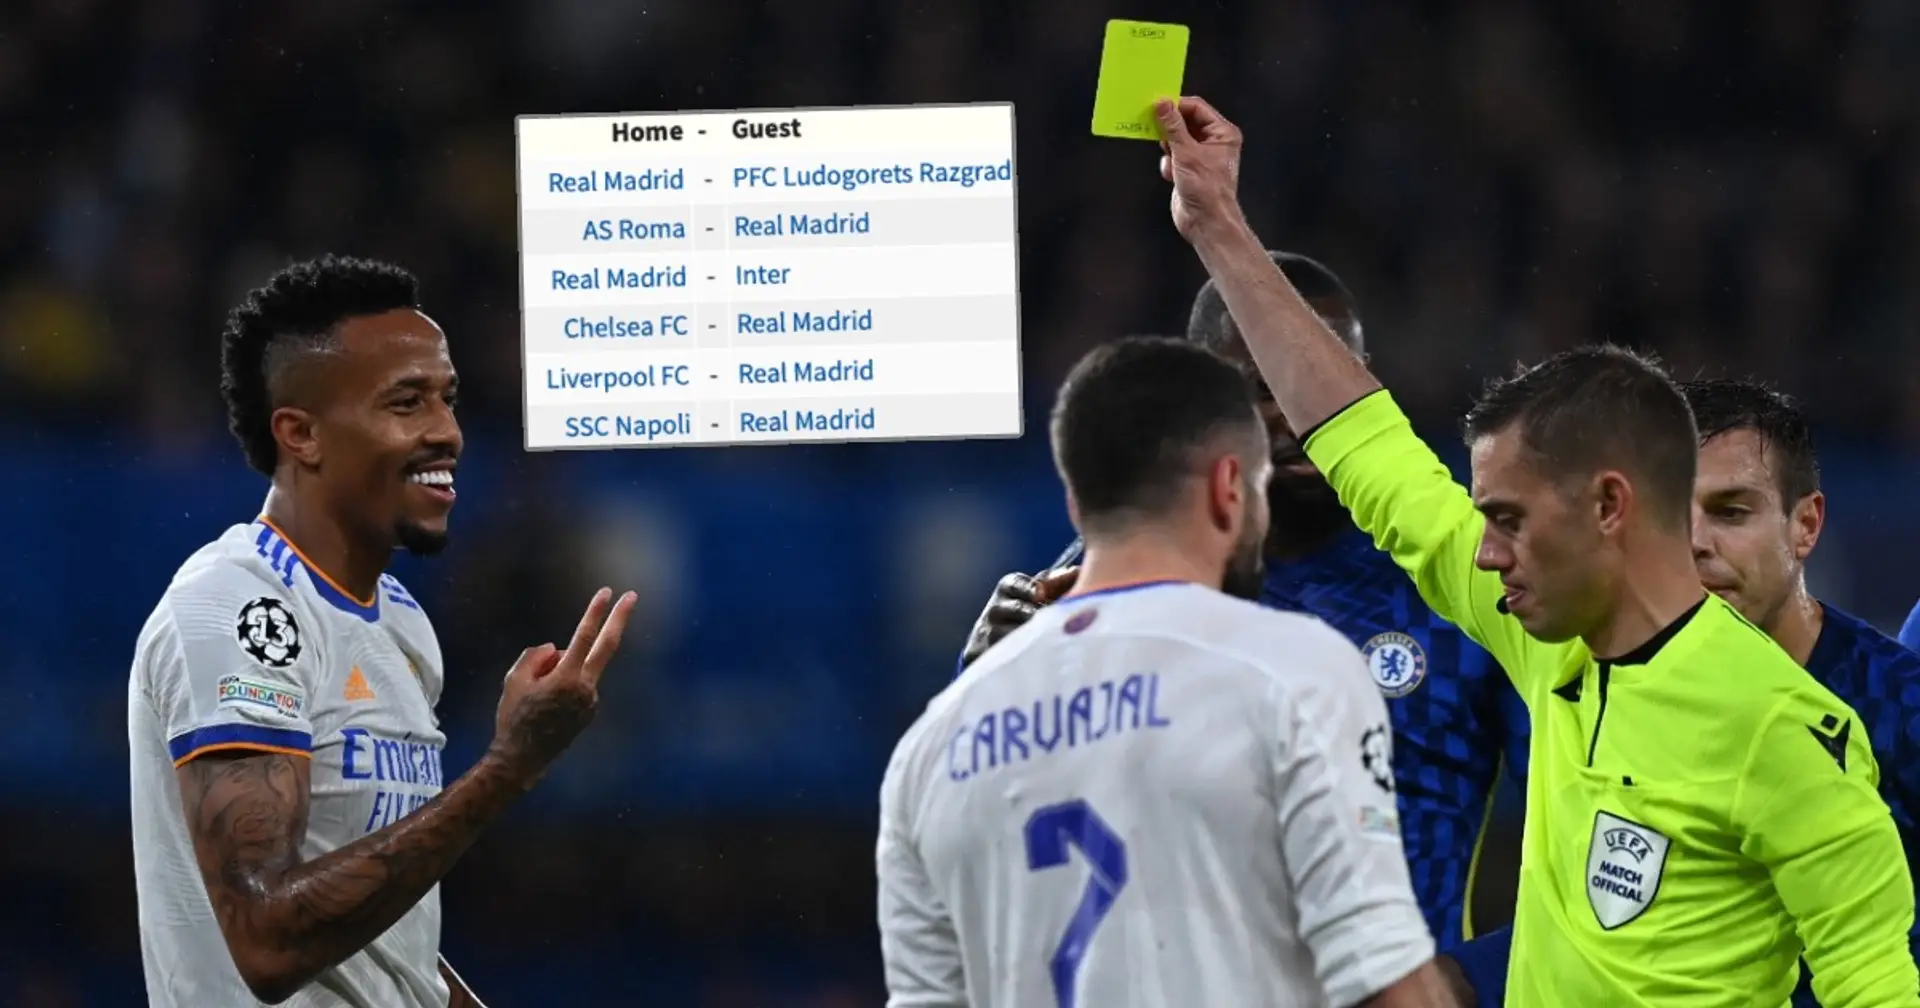 French referee Clement Turpin to officiate Bayern game - Real Madrid's past results shown